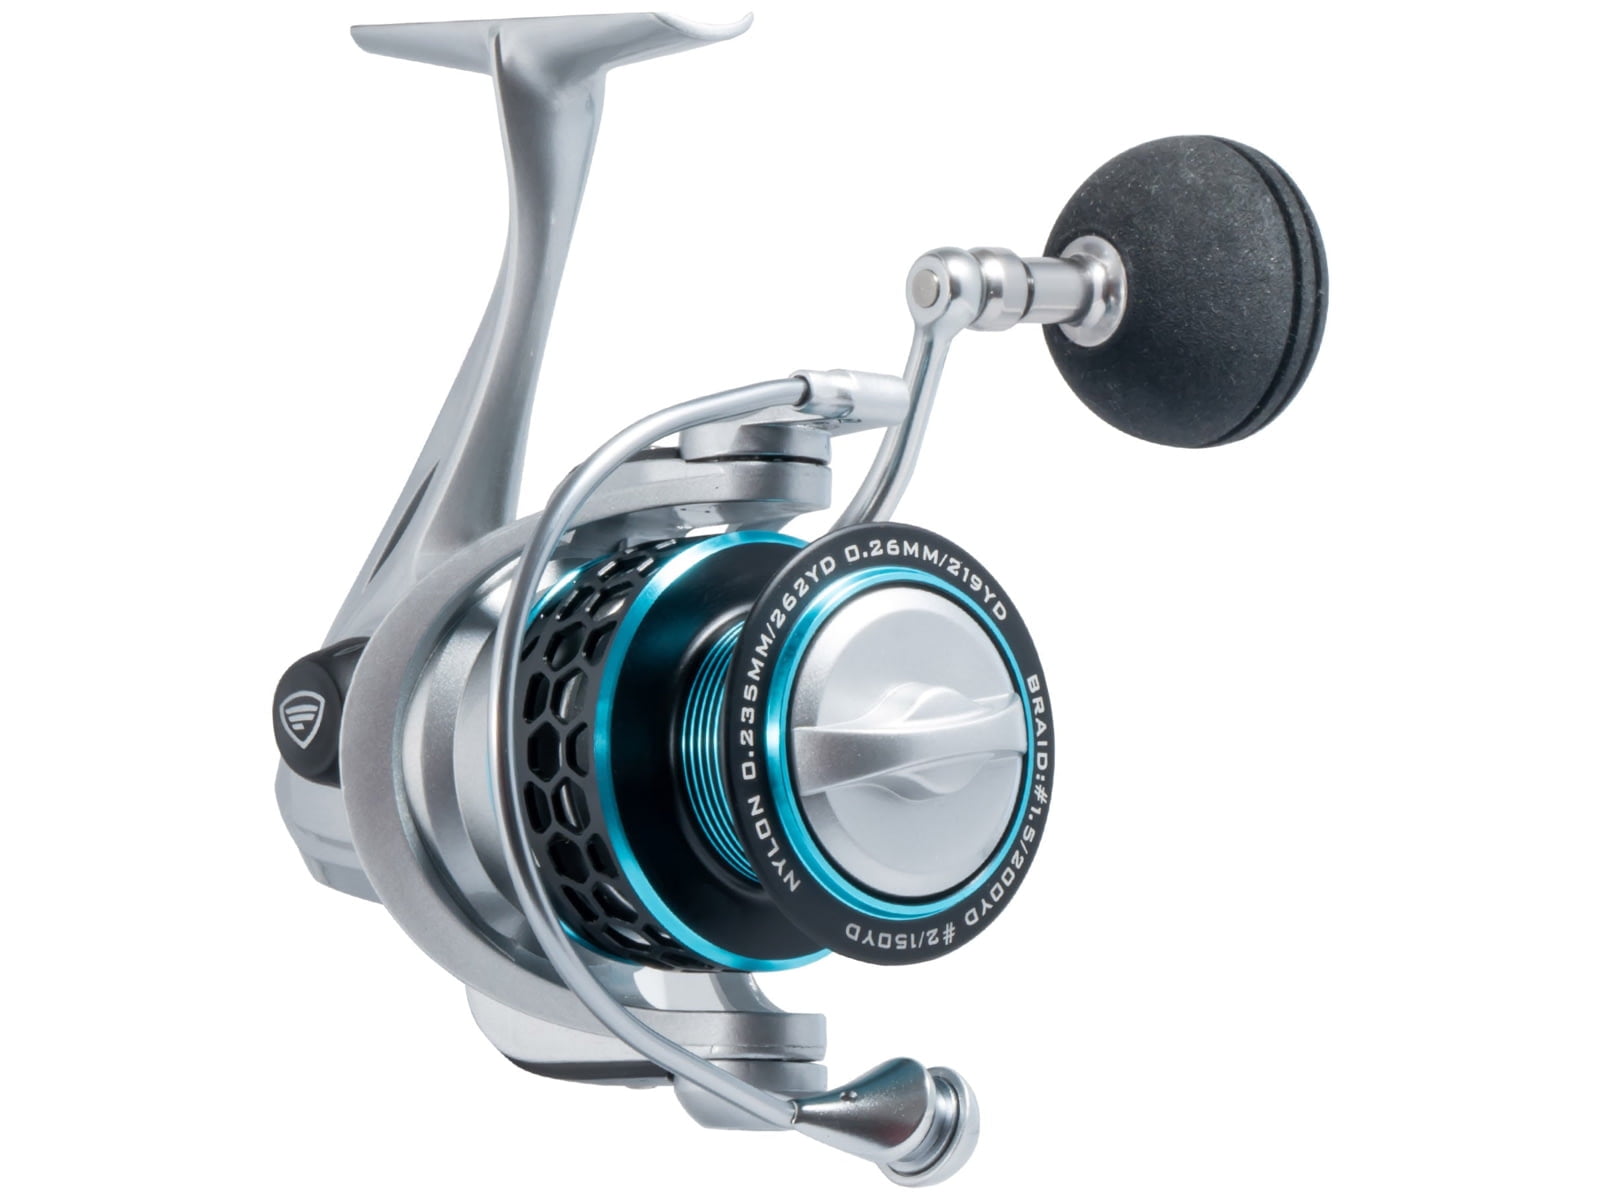 Quantum Smoke Baitcast Fishing Reel, Size 100 Reel, Right-Hand Retrieve,  Large EVA Handle Knobs and Continuous Anti-Reverse Clutch, 10+1 Bearings